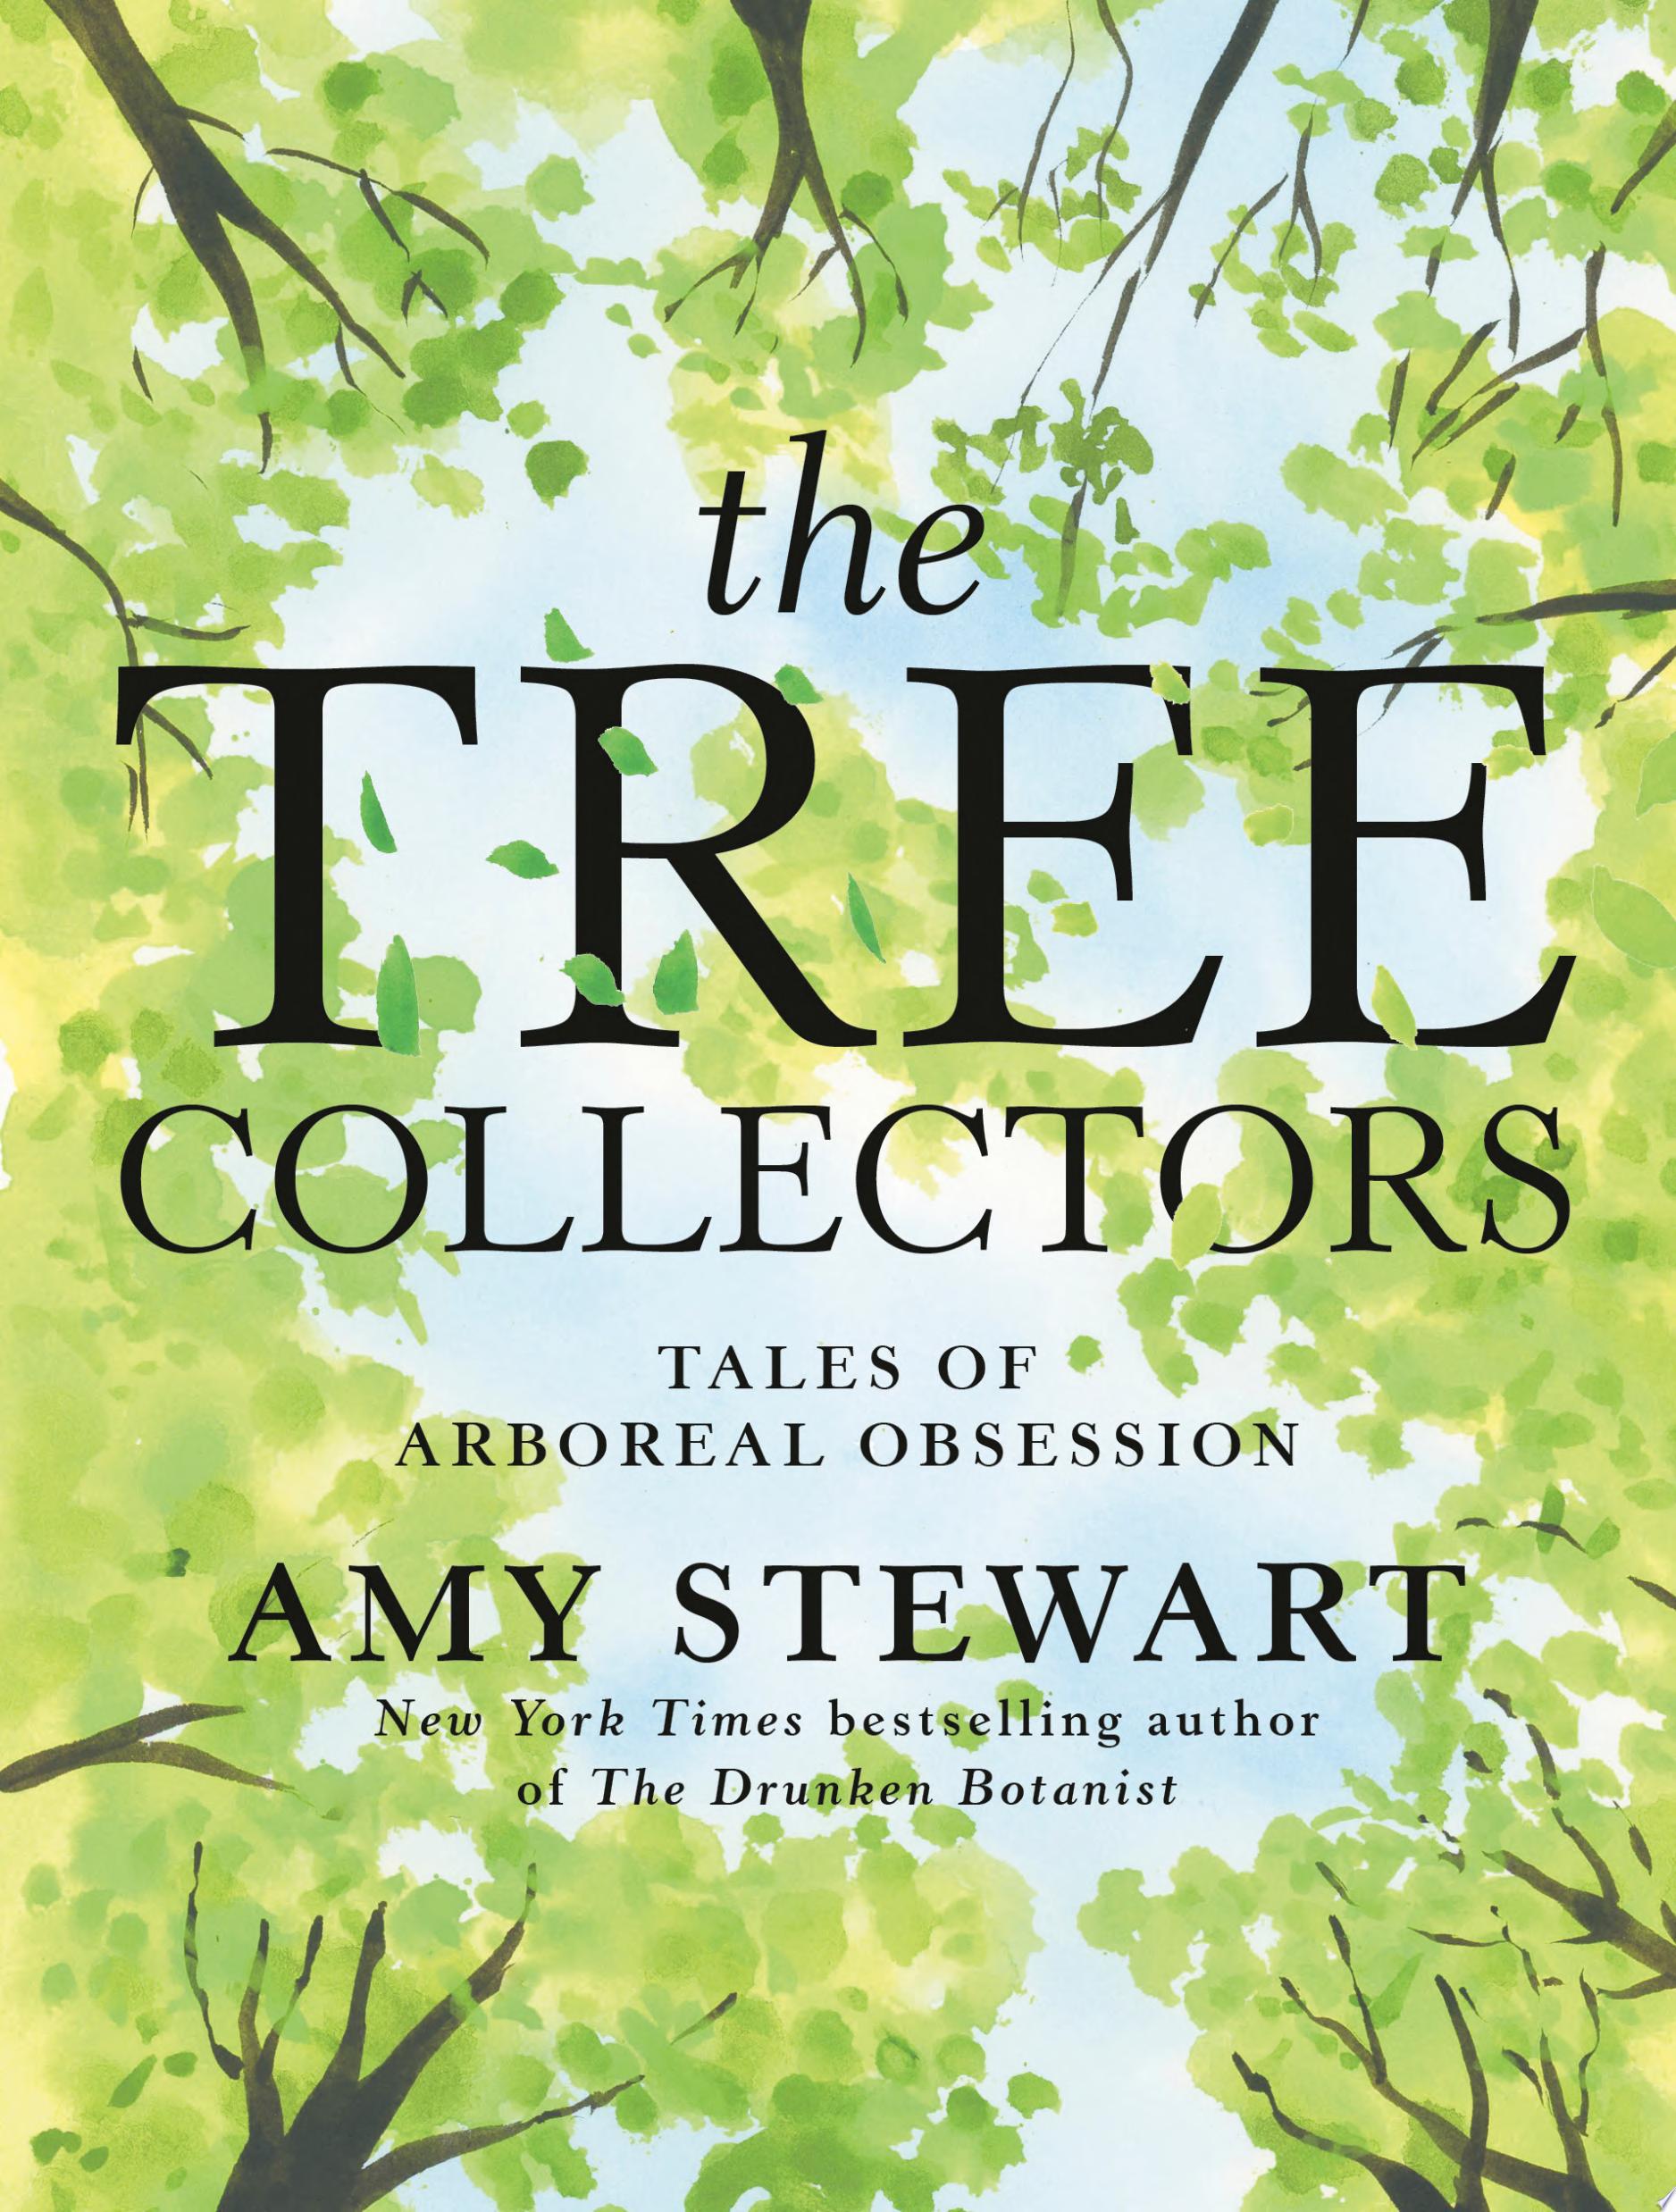 Image for "The Tree Collectors"